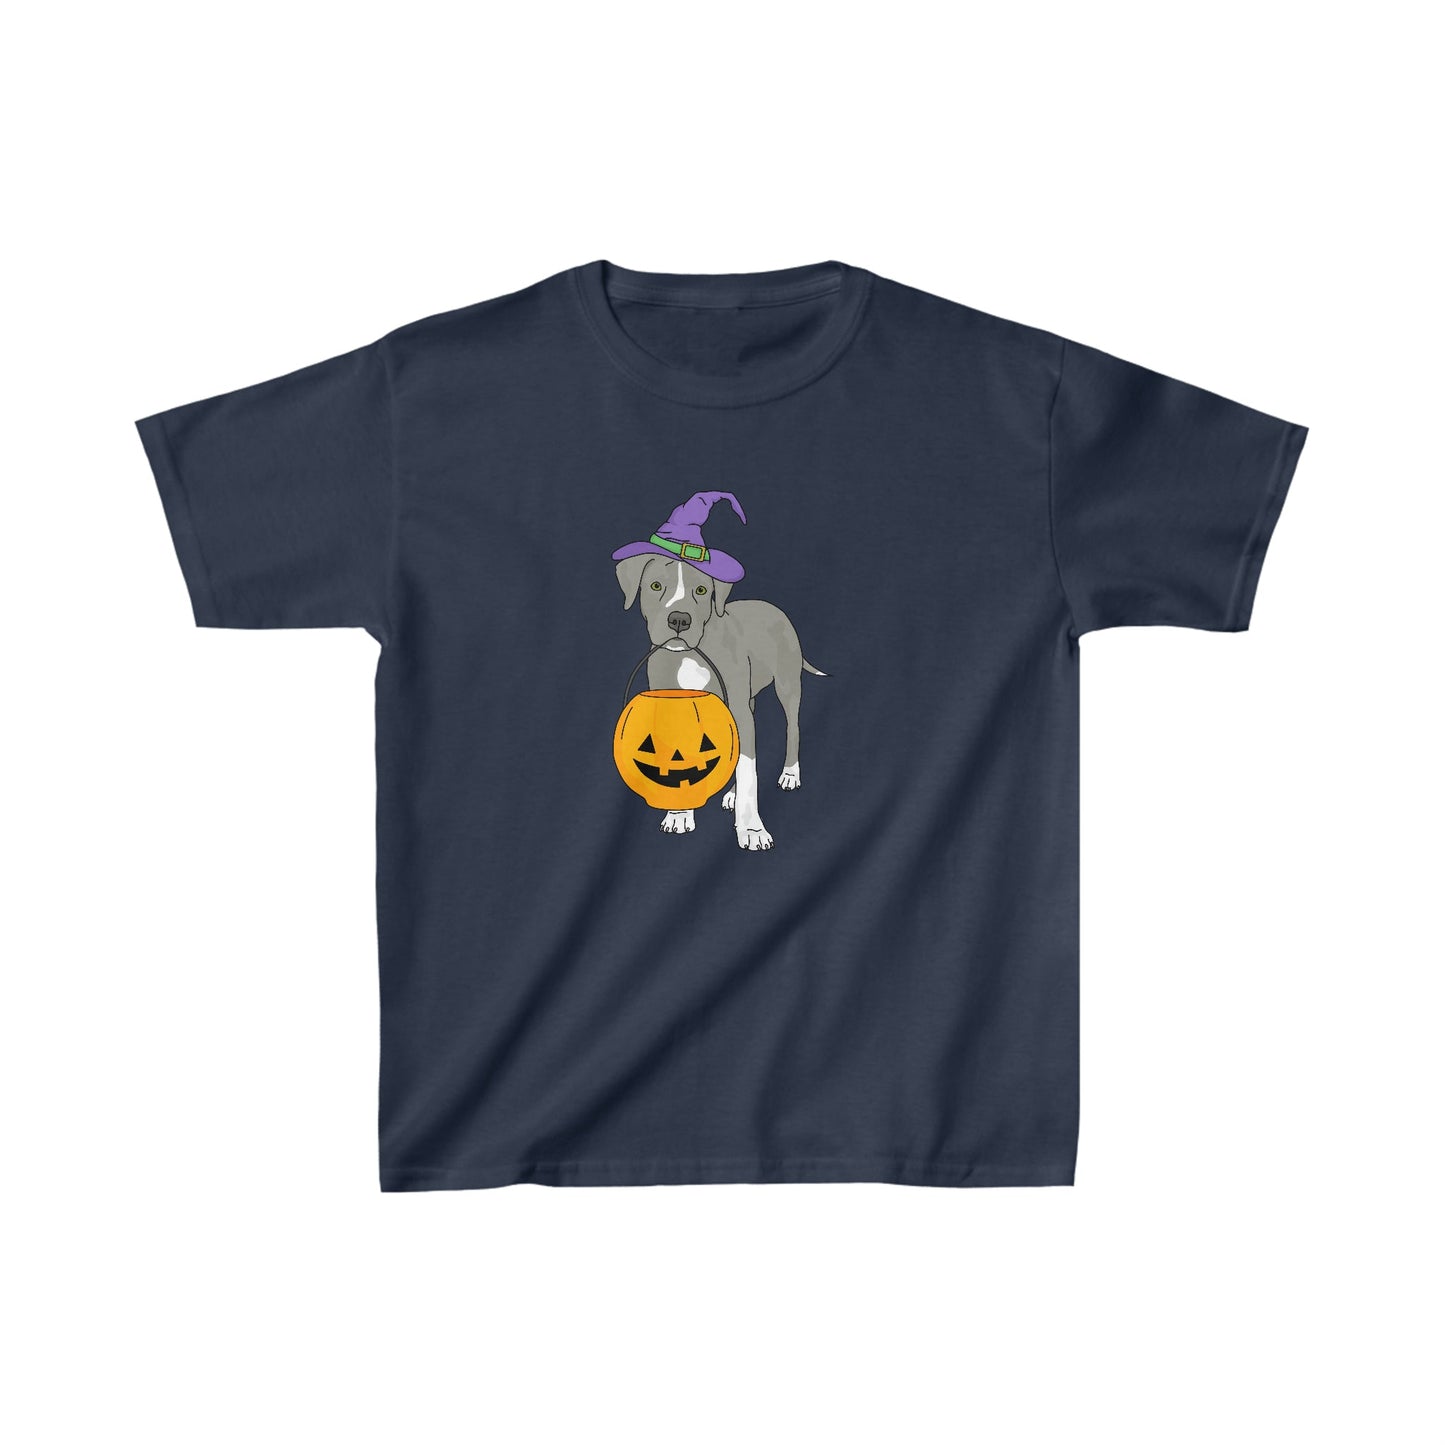 Witchy Puppy | **YOUTH SIZE** Tee - Detezi Designs-17394487339277115704